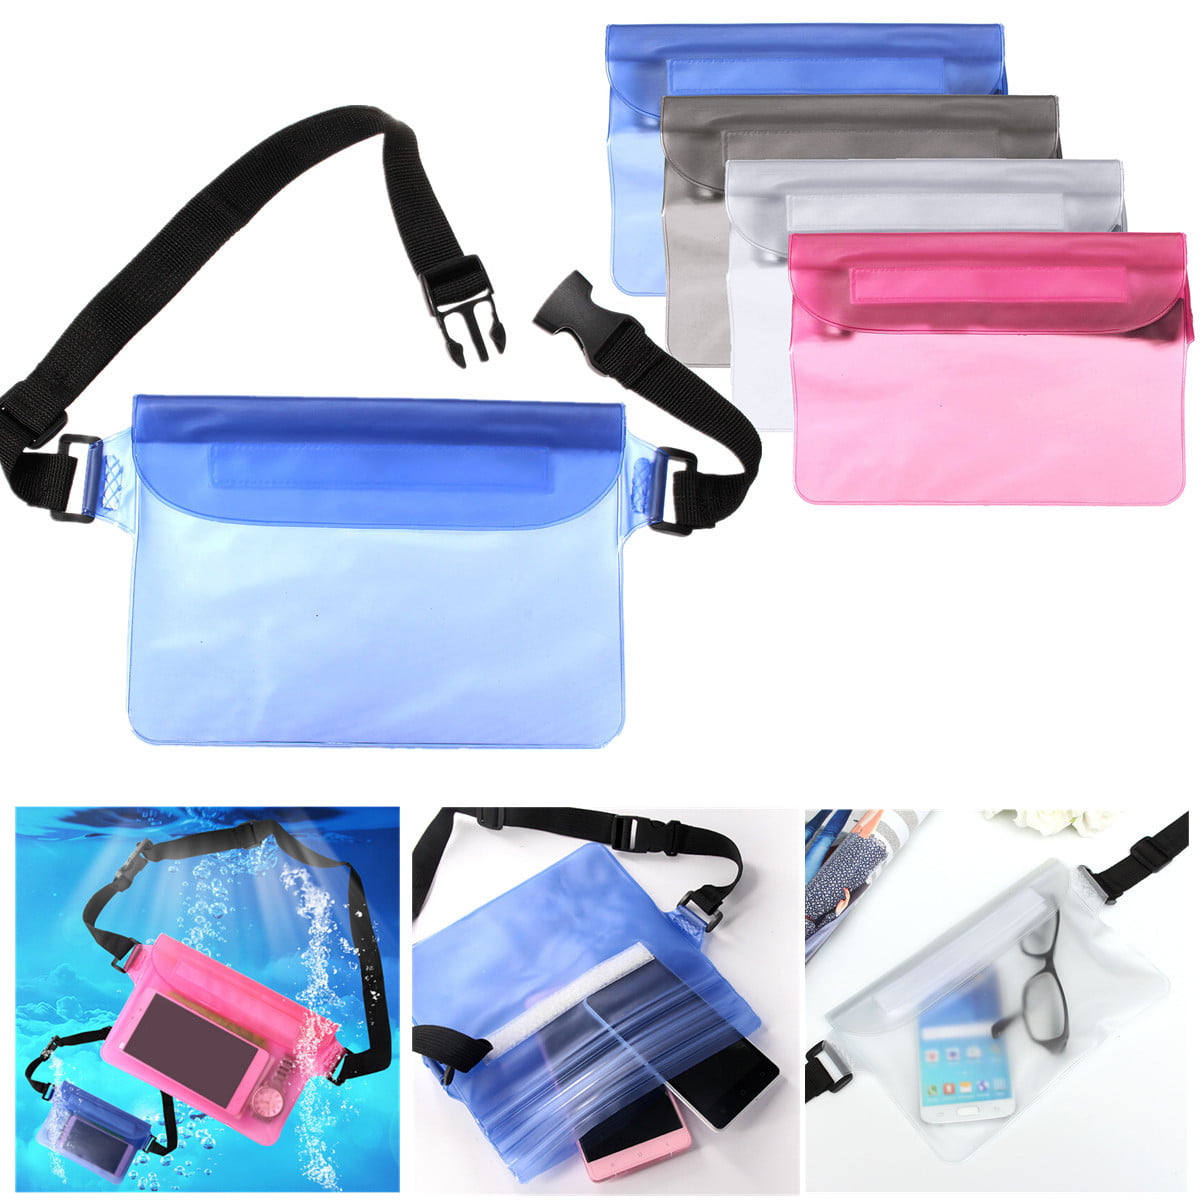 Pouch Bag Waterproof Case With Waist Strap For Beach Swimming Boat Kayakiny.ji 